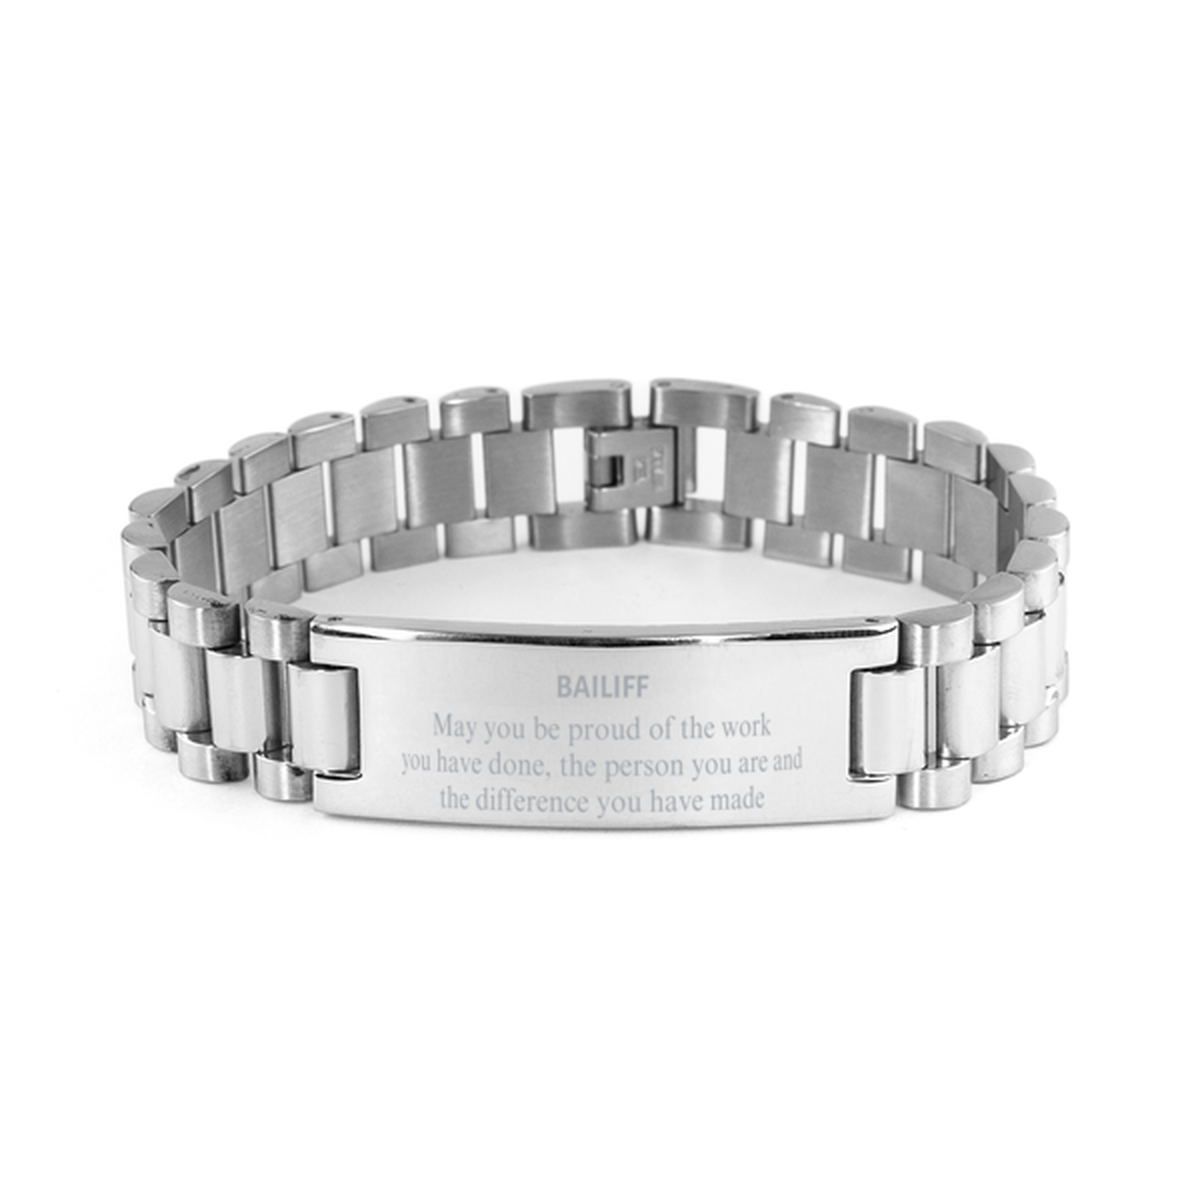 Bailiff May you be proud of the work you have done, Retirement Bailiff Ladder Stainless Steel Bracelet for Colleague Appreciation Gifts Amazing for Bailiff